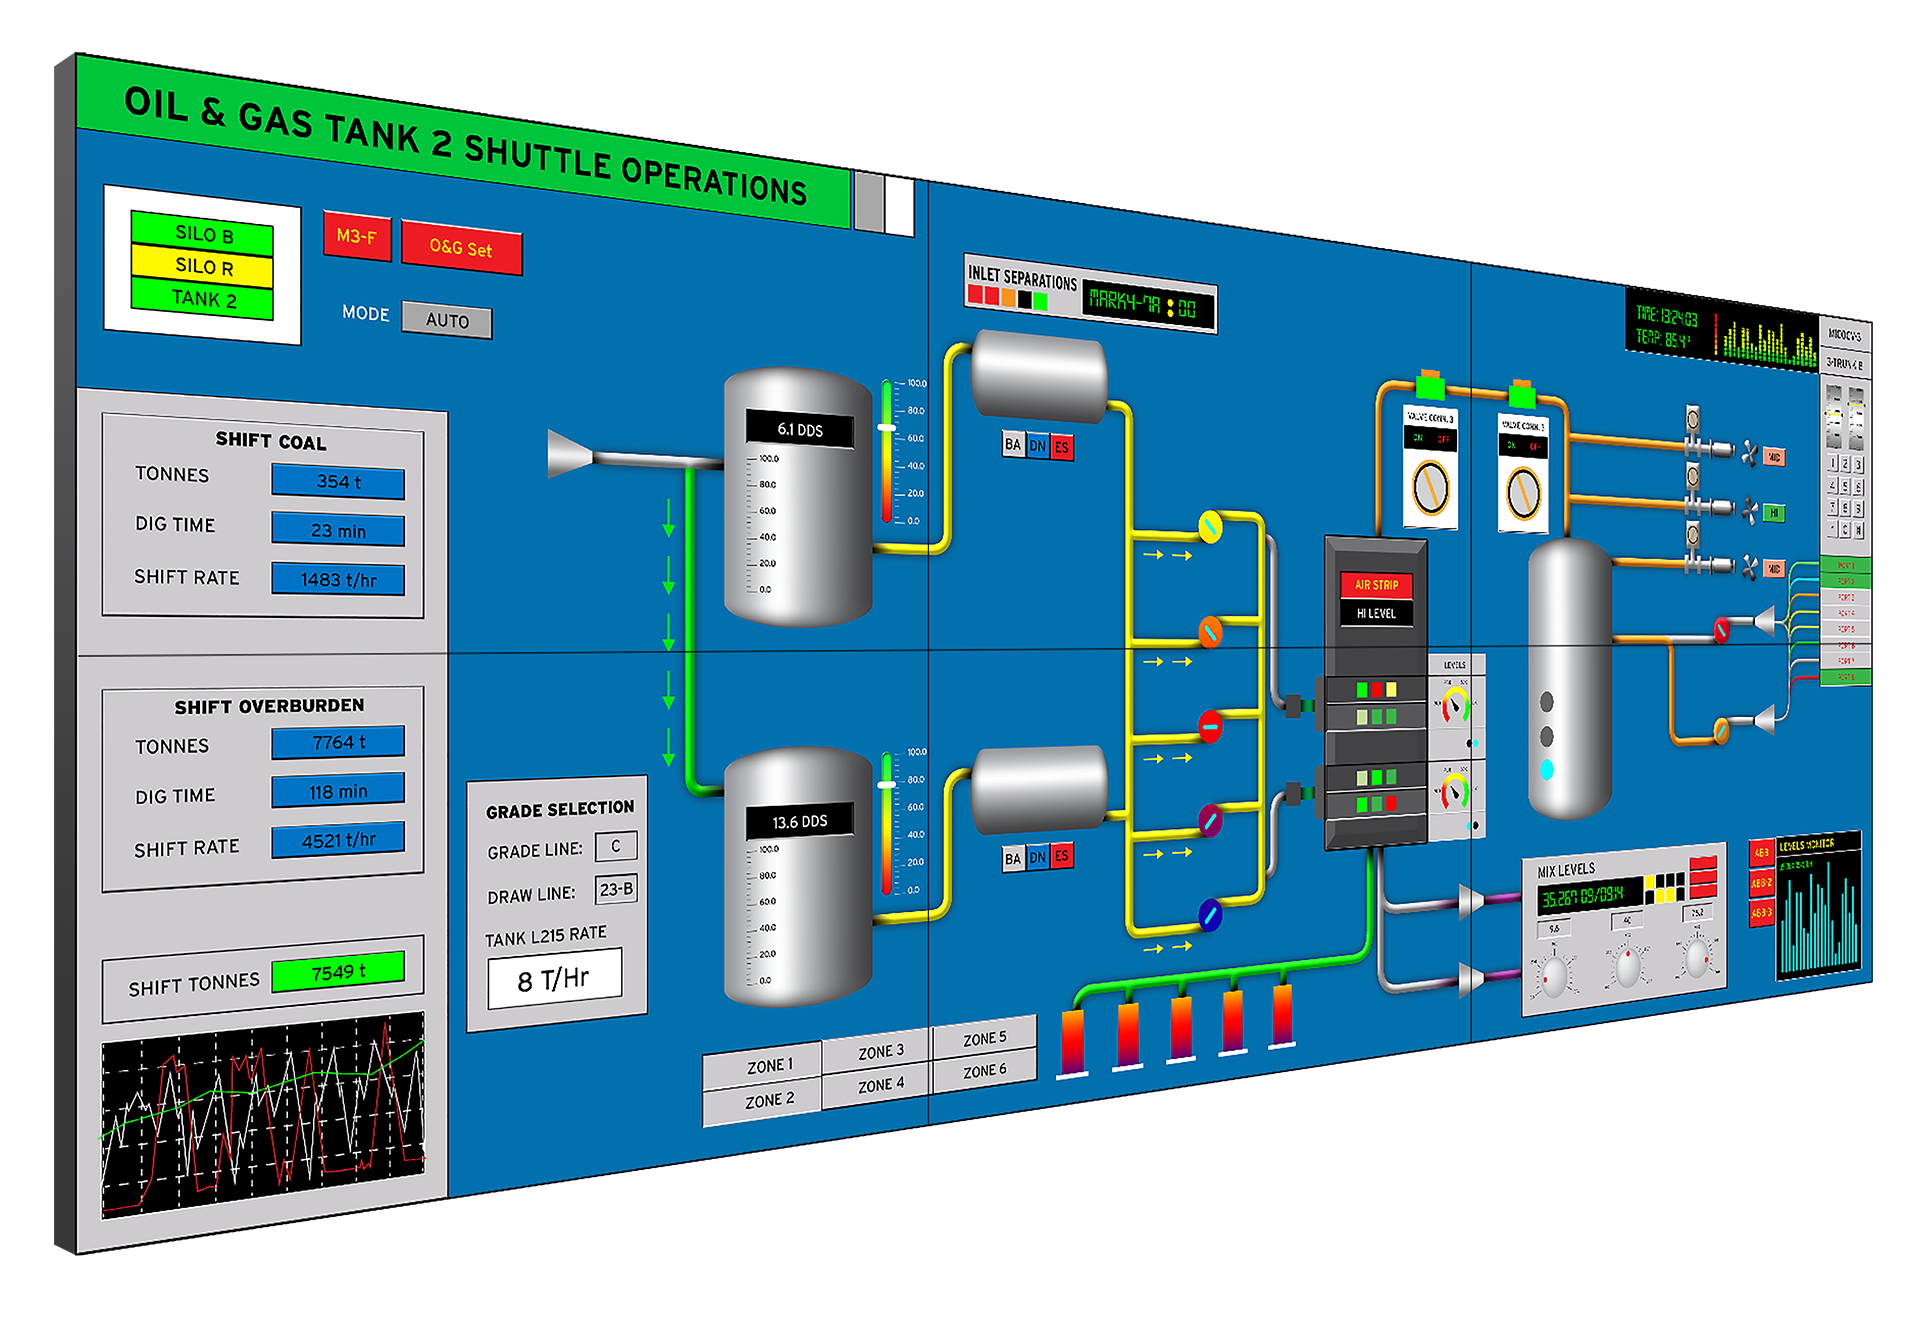 labview basic pid controller